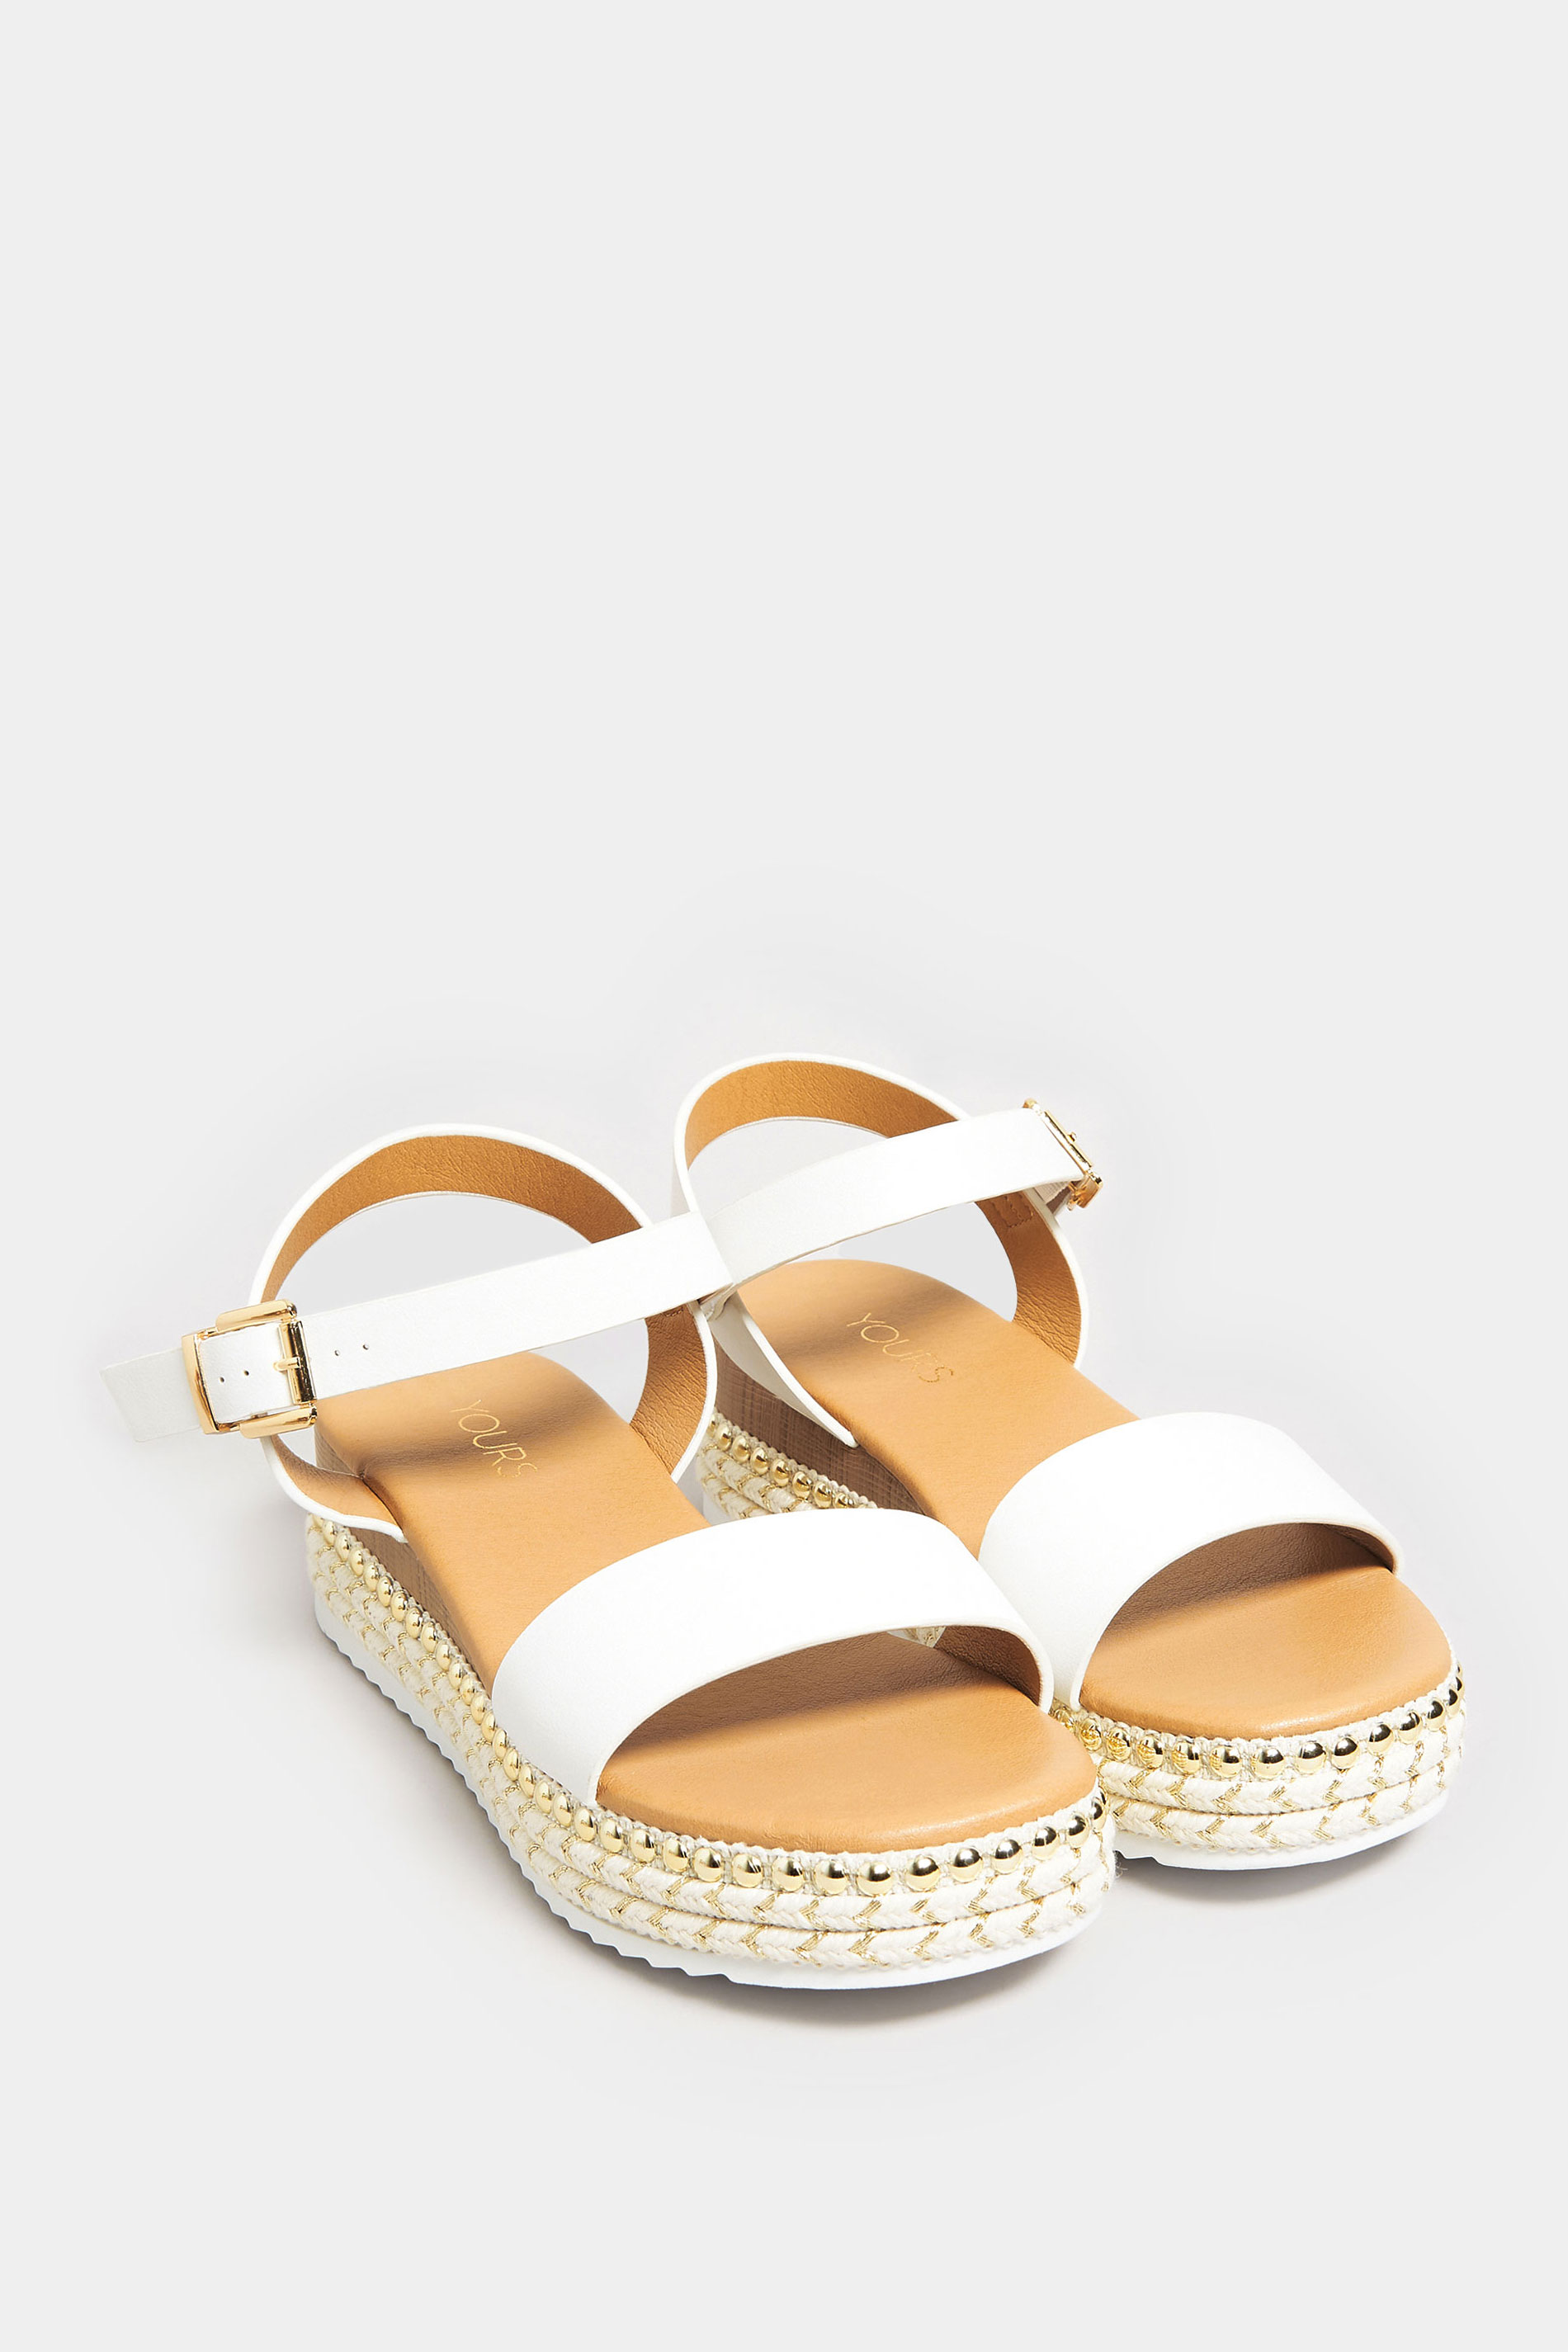 Plus Size White & Brown Buckle Platform Espadrille Wedge Heels | Yours Clothing  2